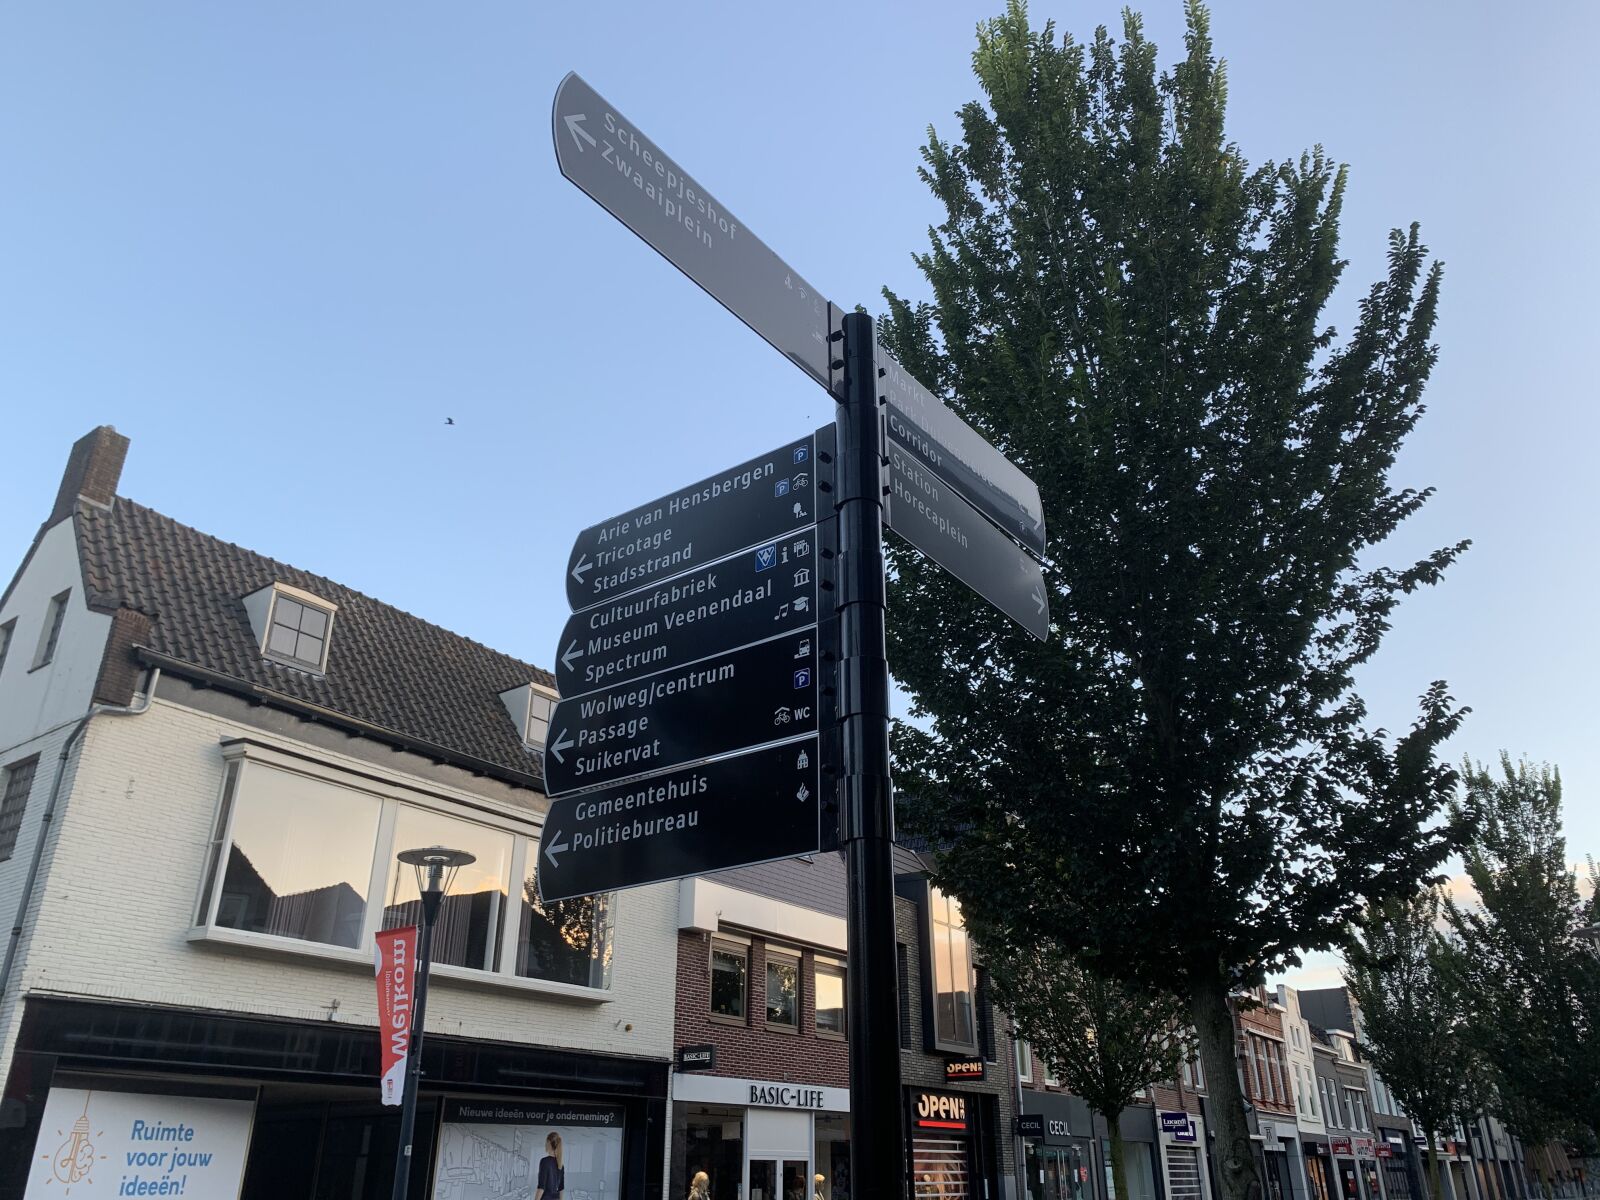 Apple iPhone XS sample photo. Anwb, board, road sign photography